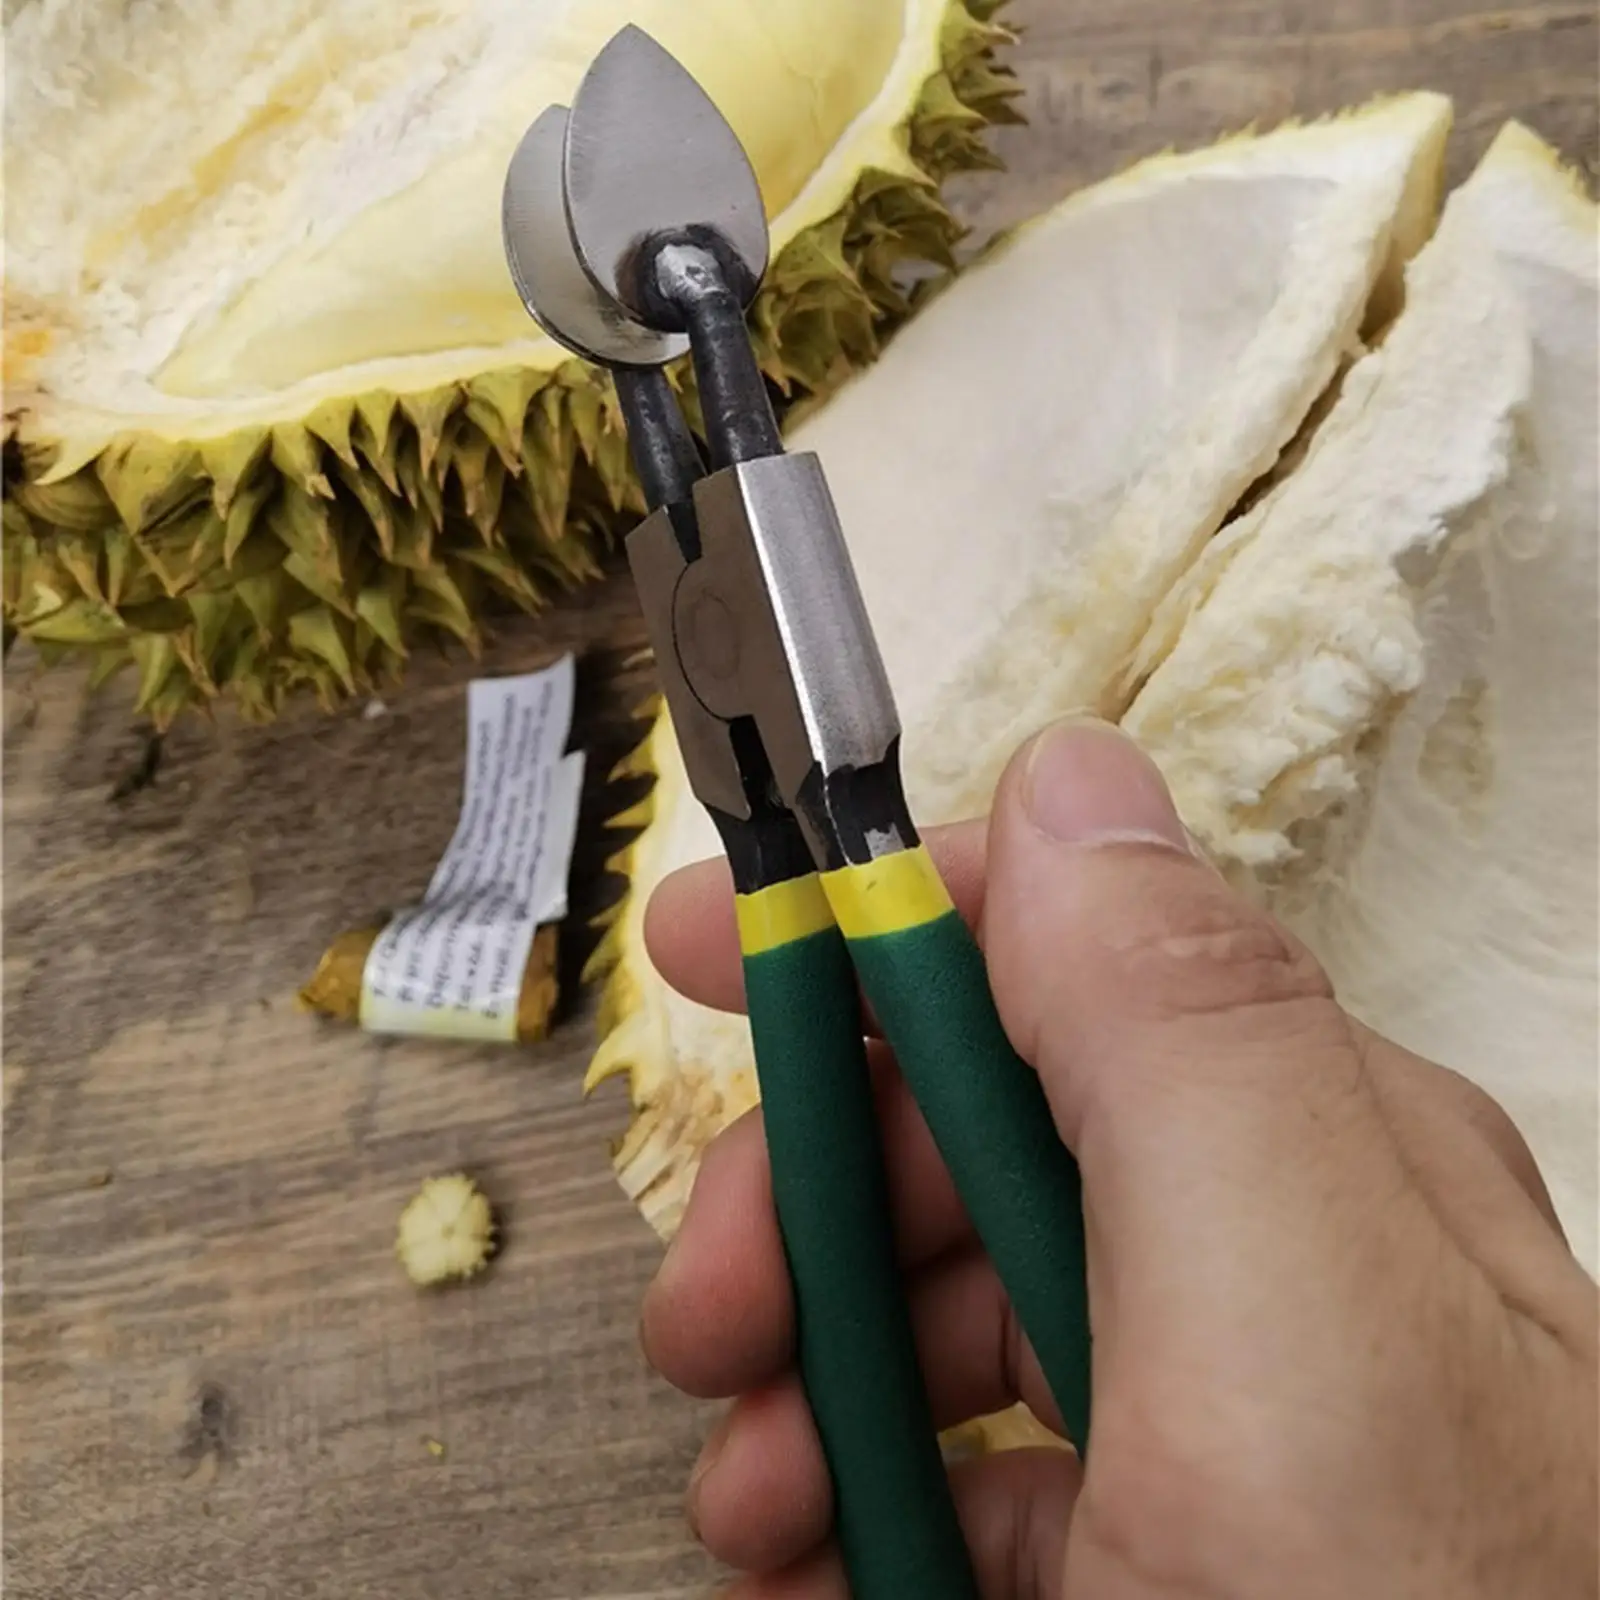 Durian Peel Breaking Tool Durable Peeling Smooth Durian Opener Manual Durian Shelling Machine for Kitchen Restaurant Household